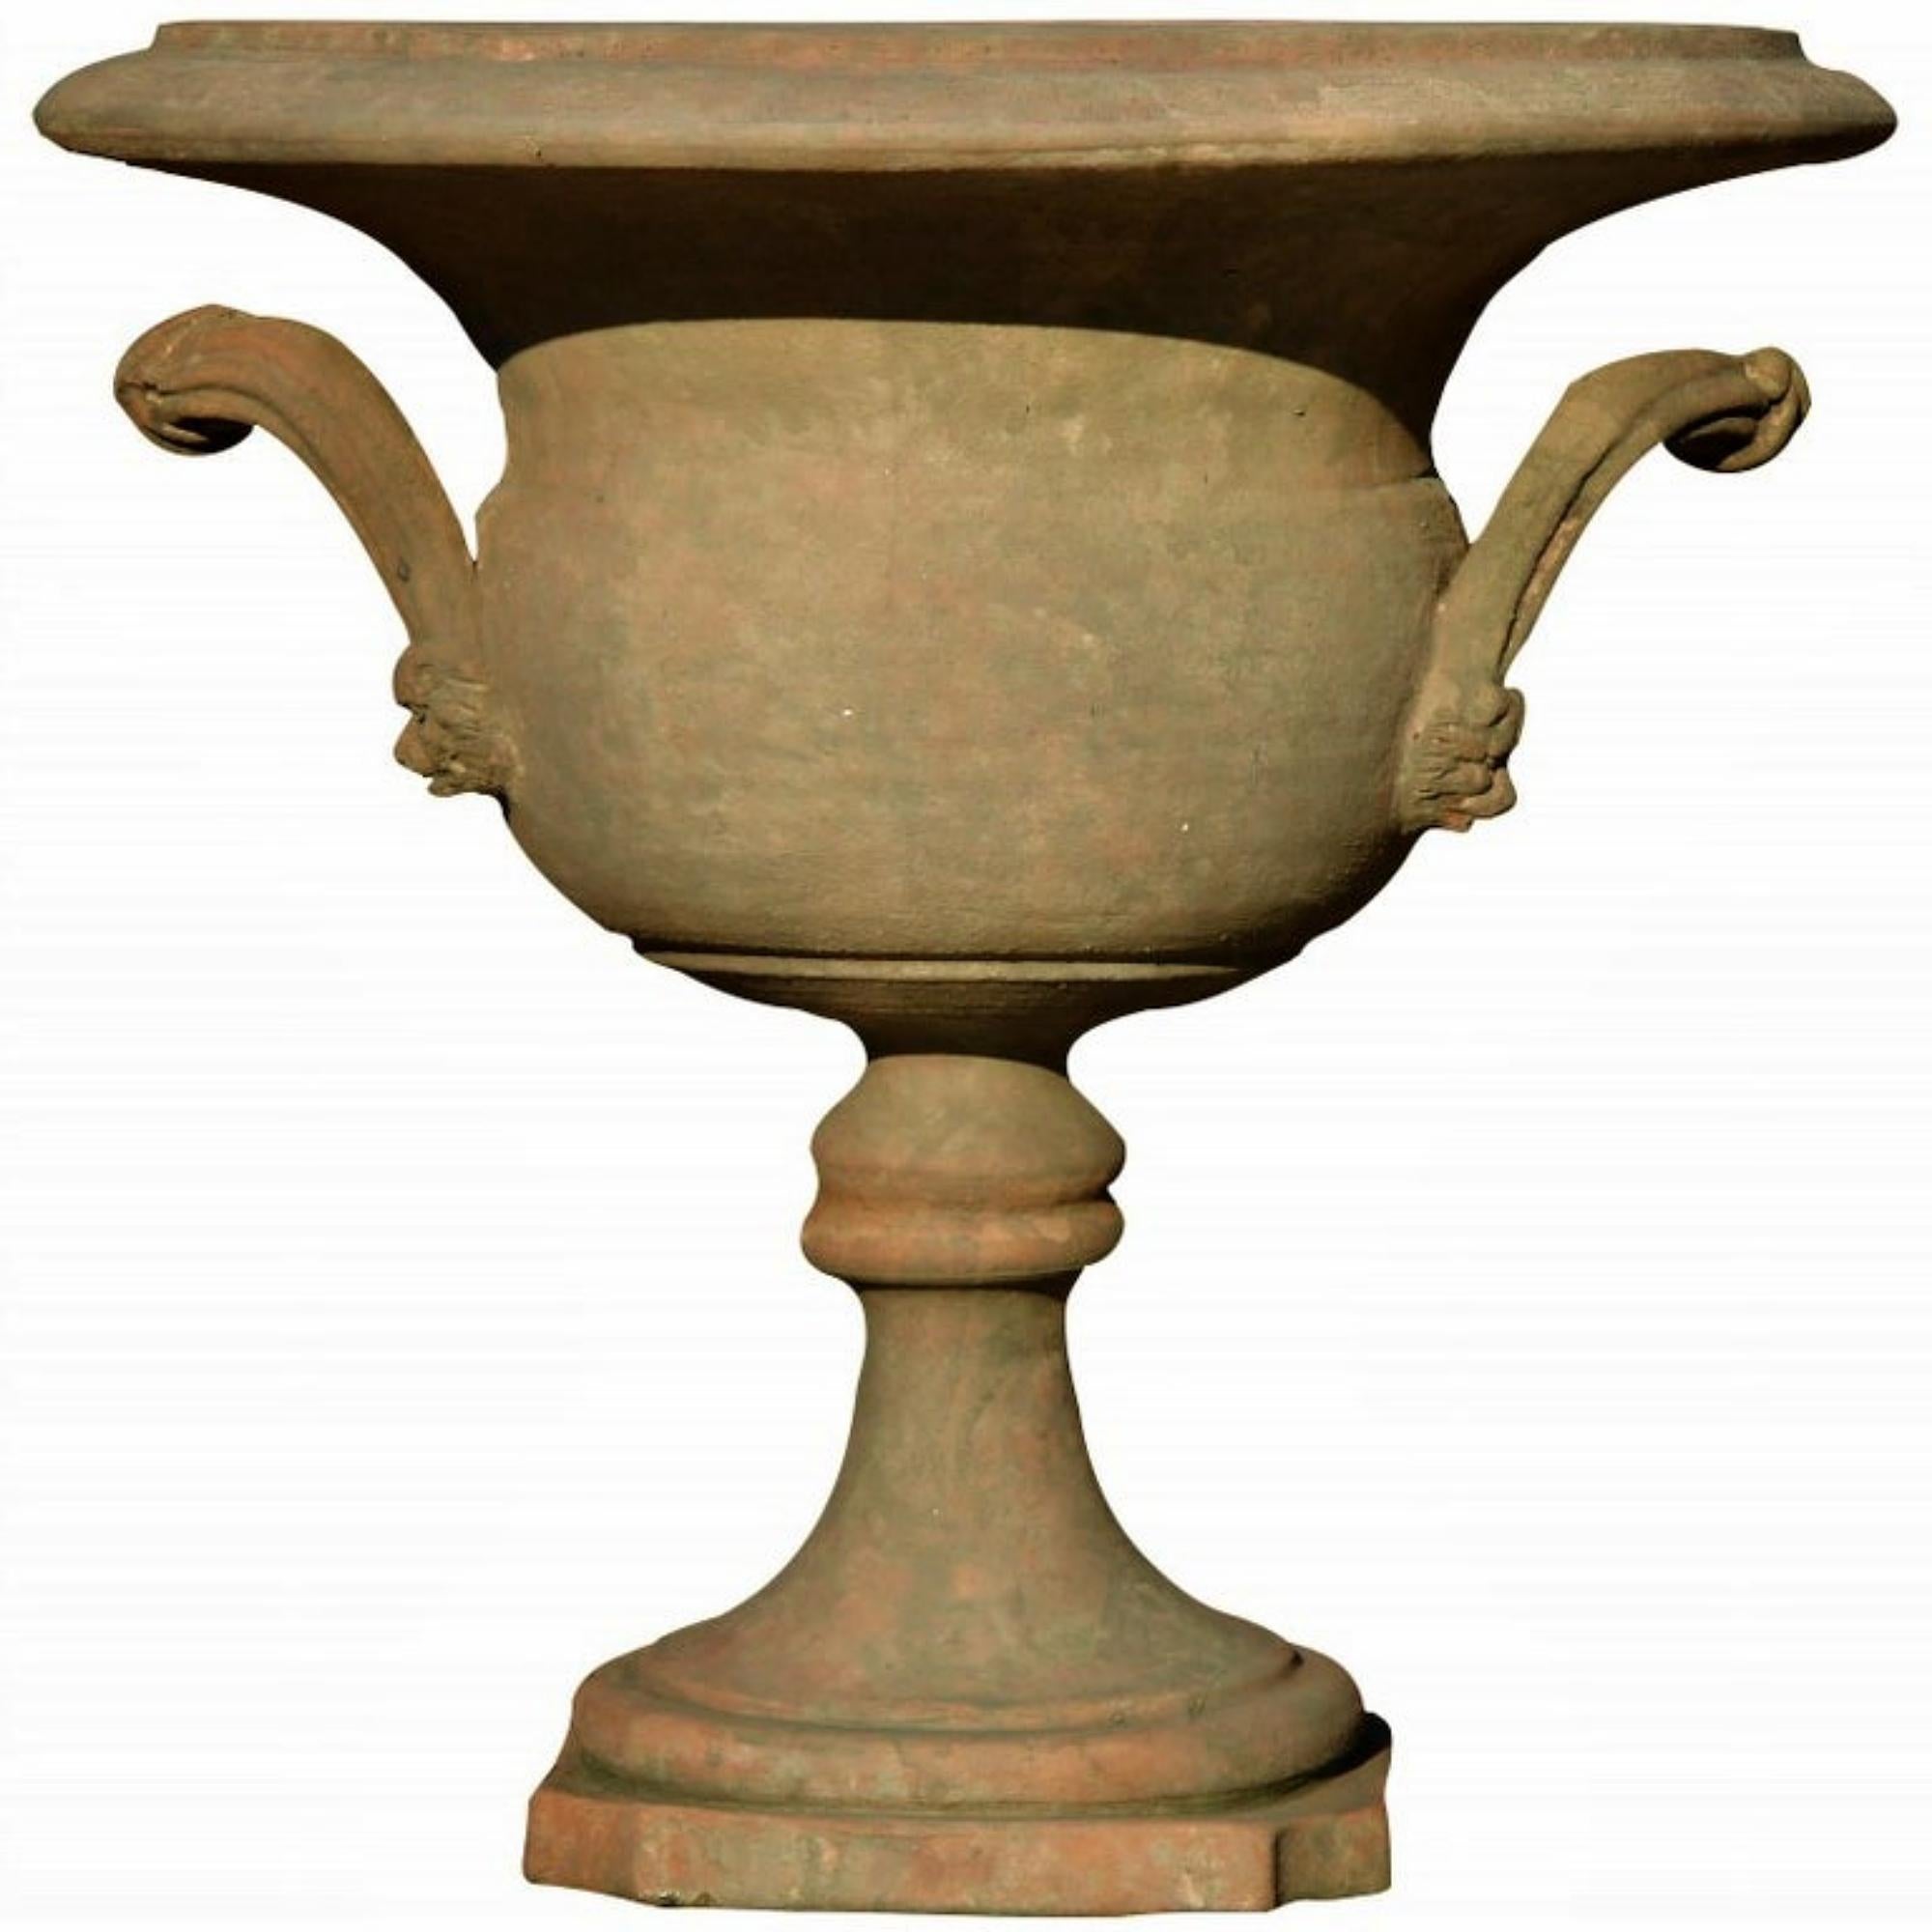 Modern Pair of Ornamental Terracotta Goblet with Loop Handles, Early 20th Century For Sale